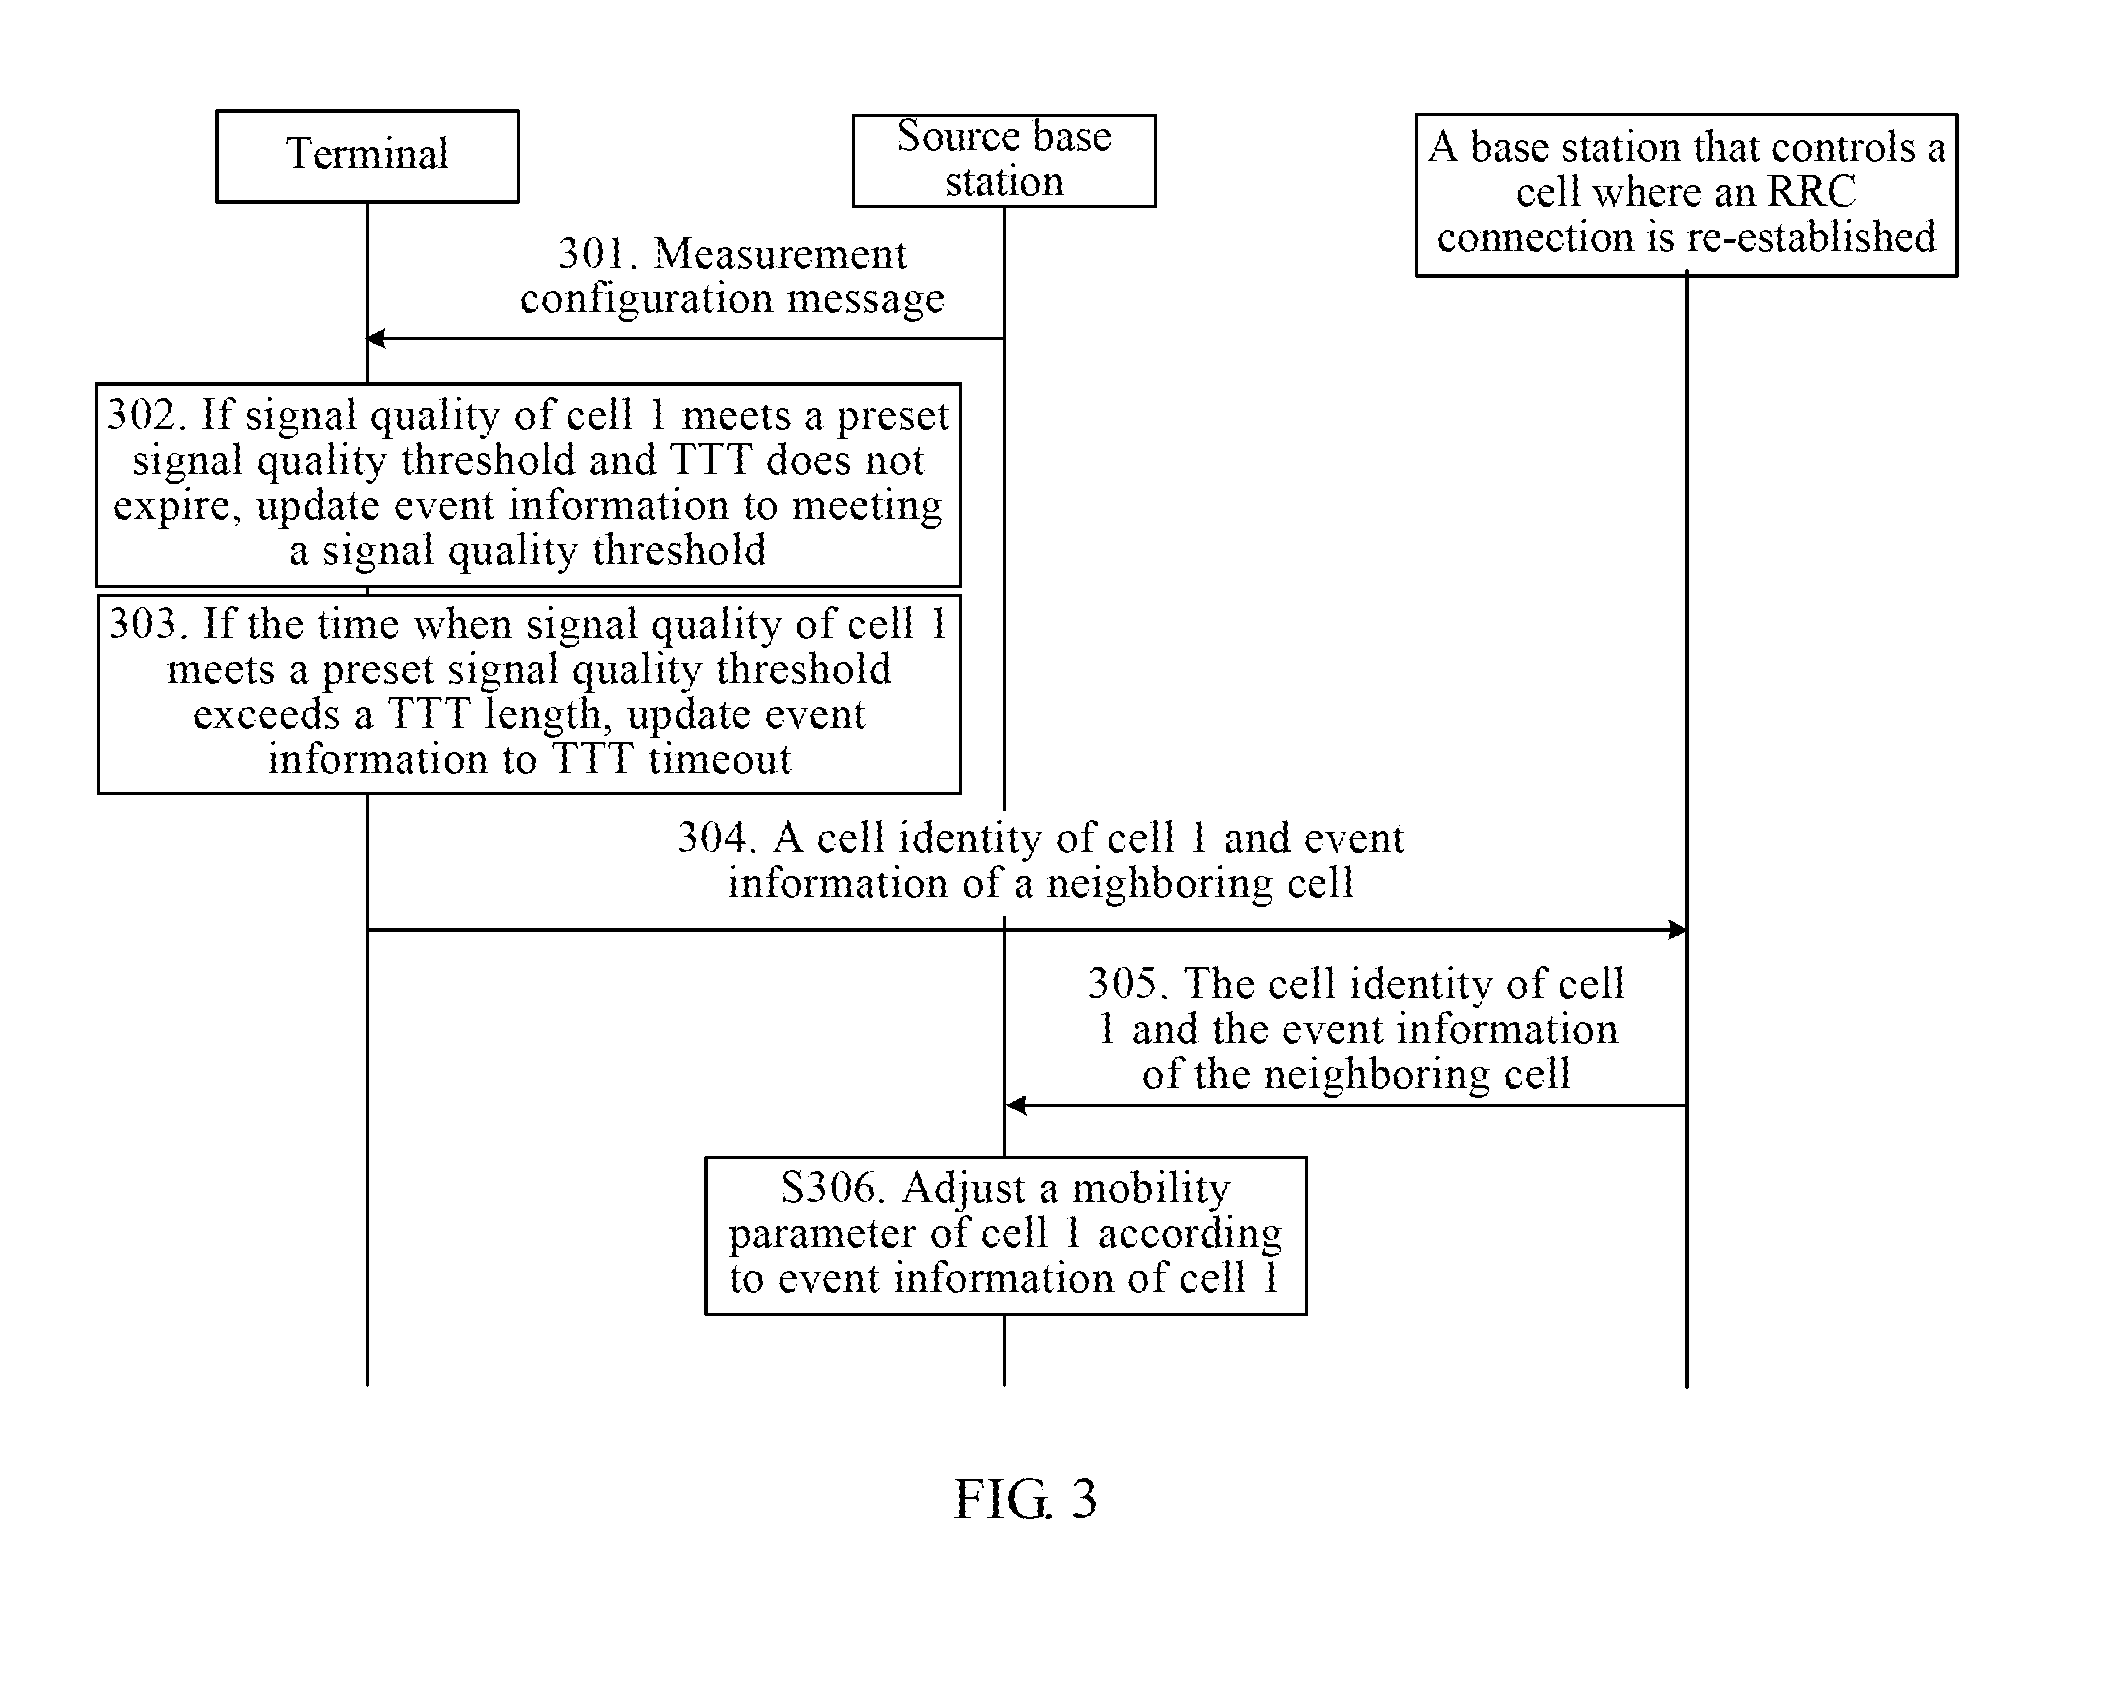 Method and Device for Reporting Cell Information and Adjusting Cell Mobility Parameter